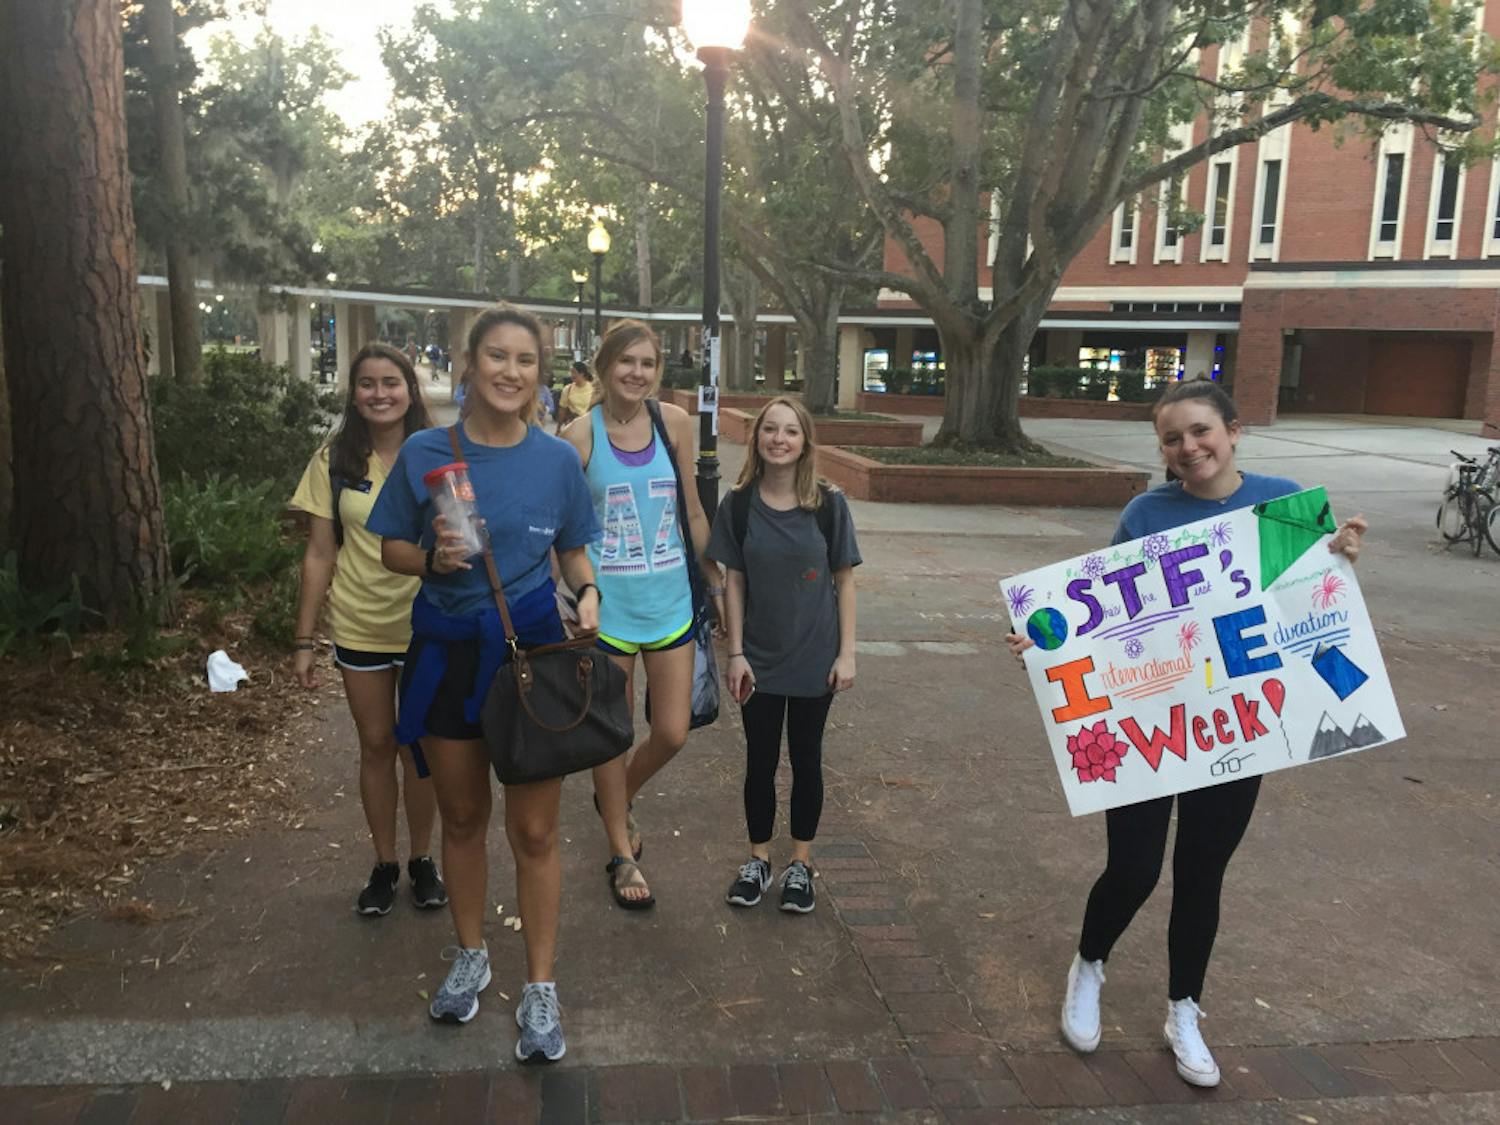 Members of She’s The First club finish their mile-long walk toward Matherly Hall. The walk was held to raise awareness about women’s education around the world.